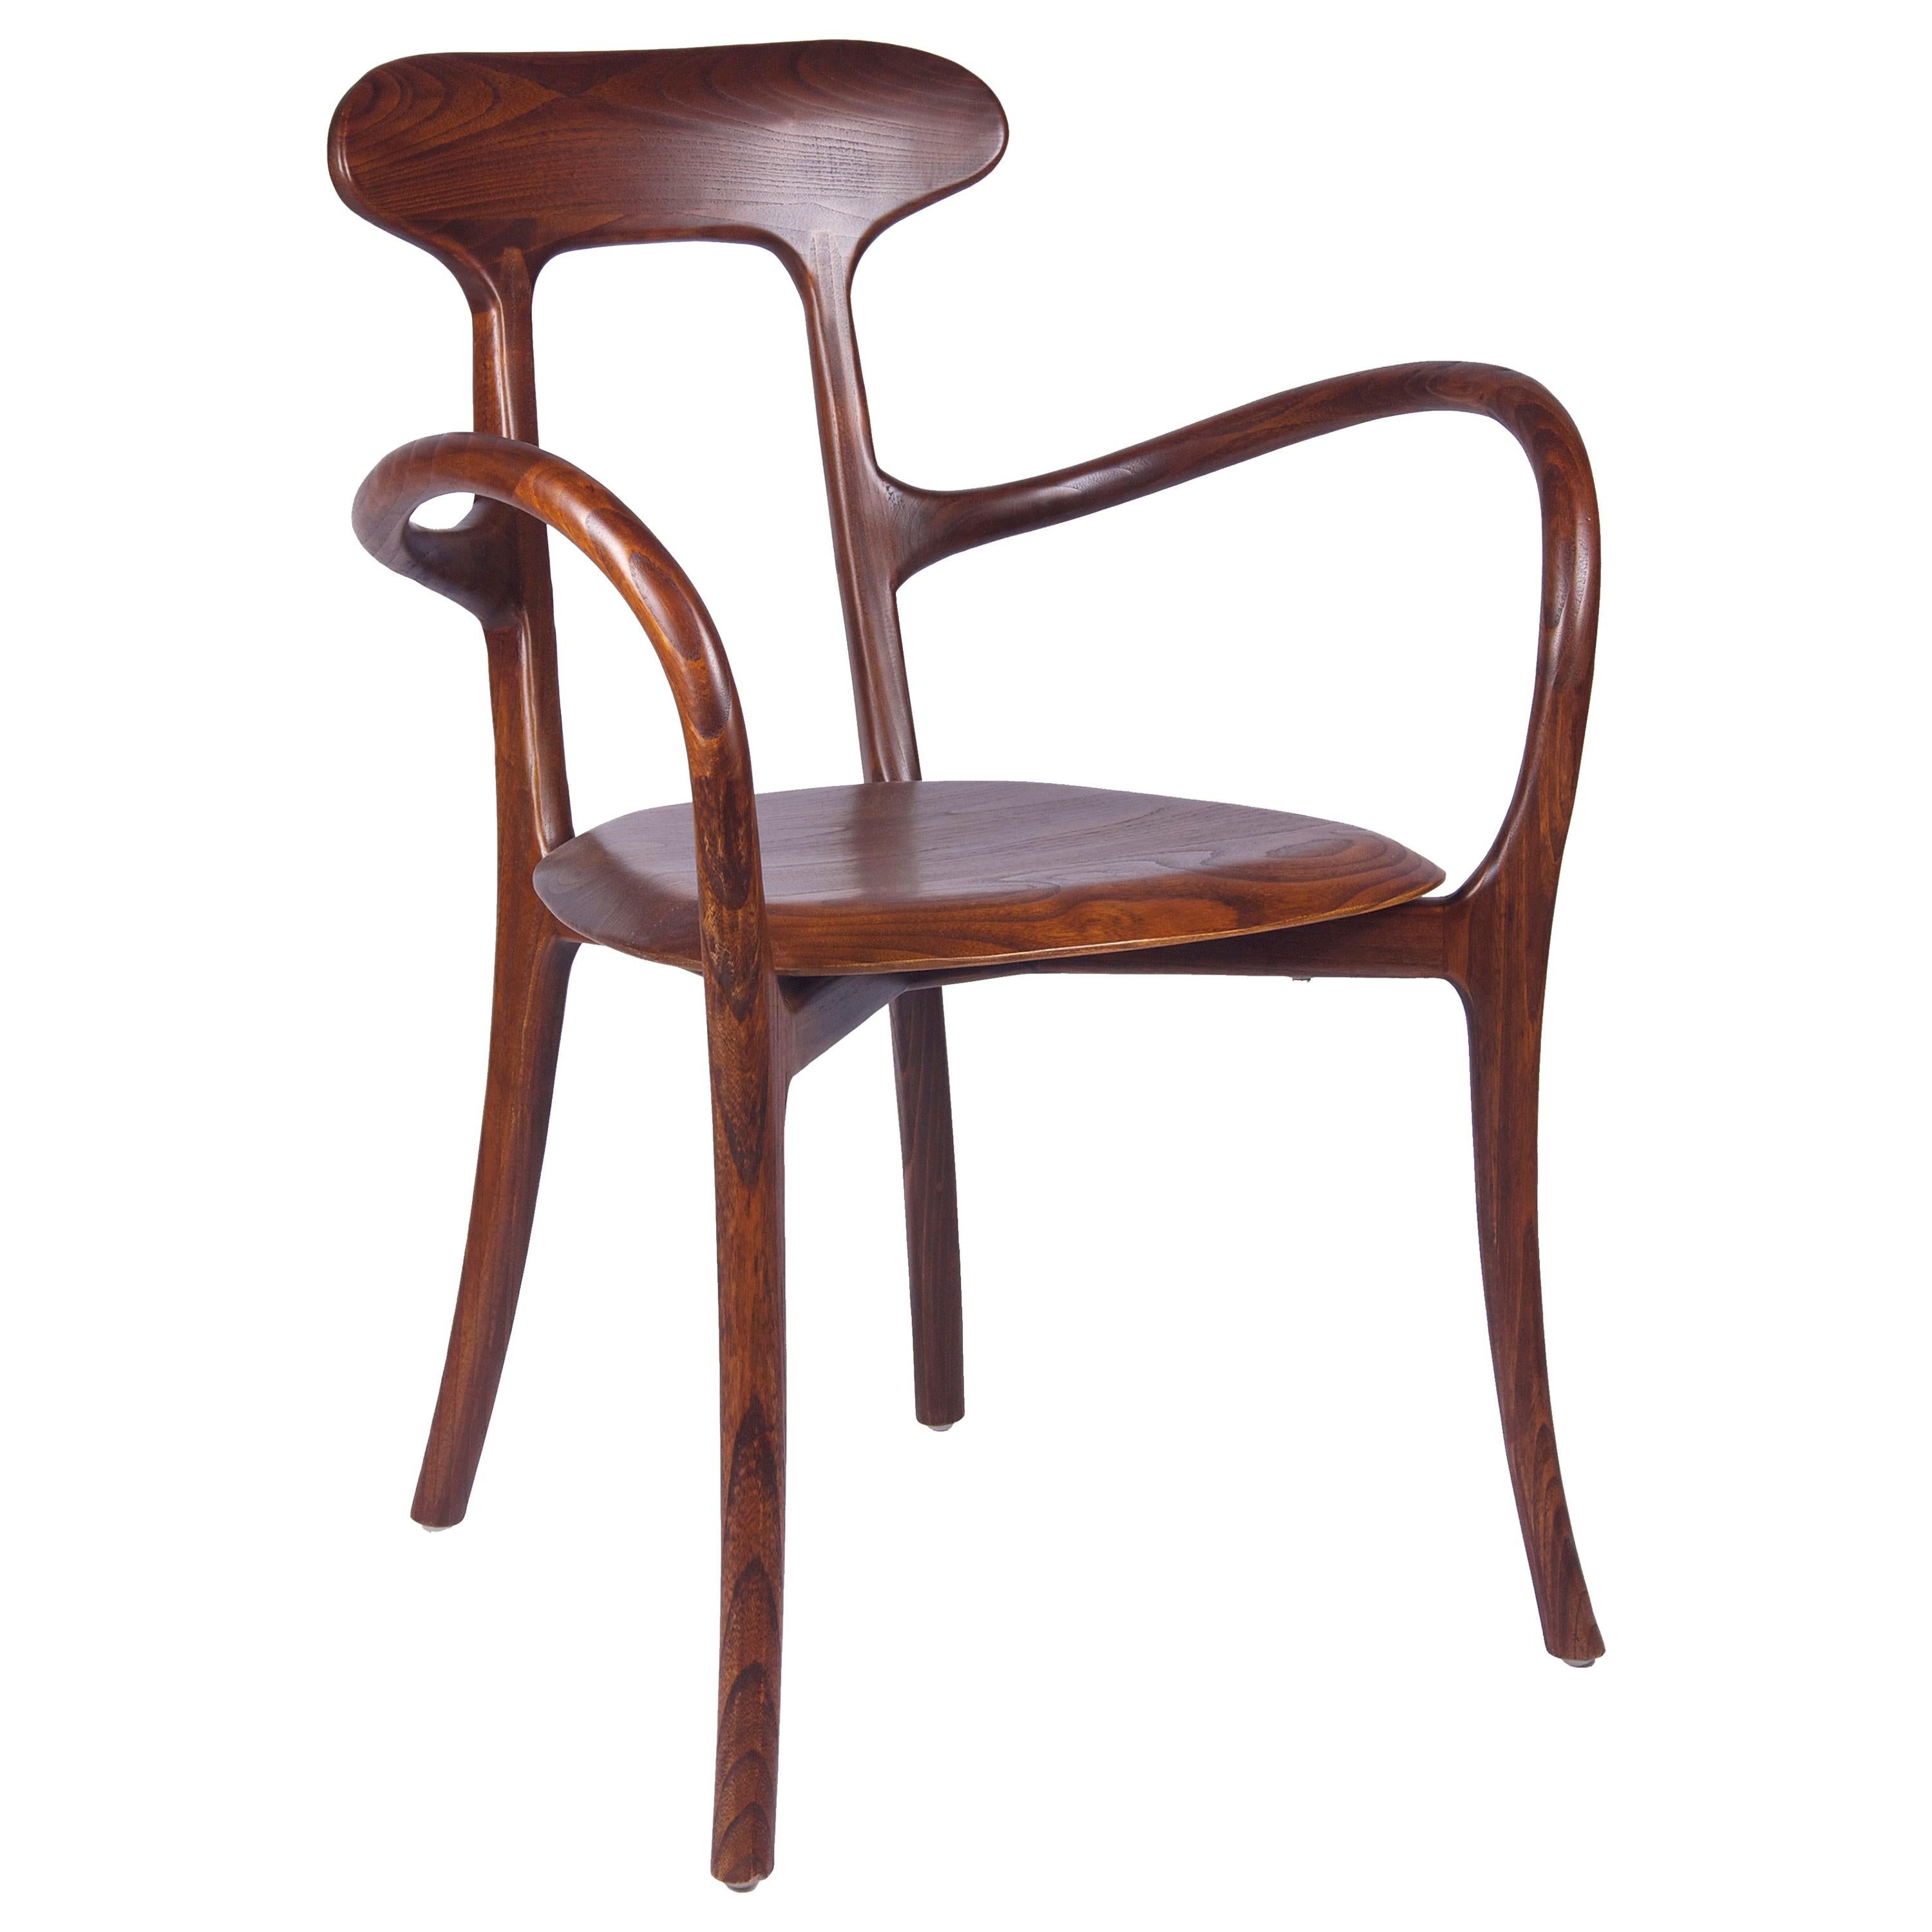 New Bentwood Armchair with Wood Seat and Back